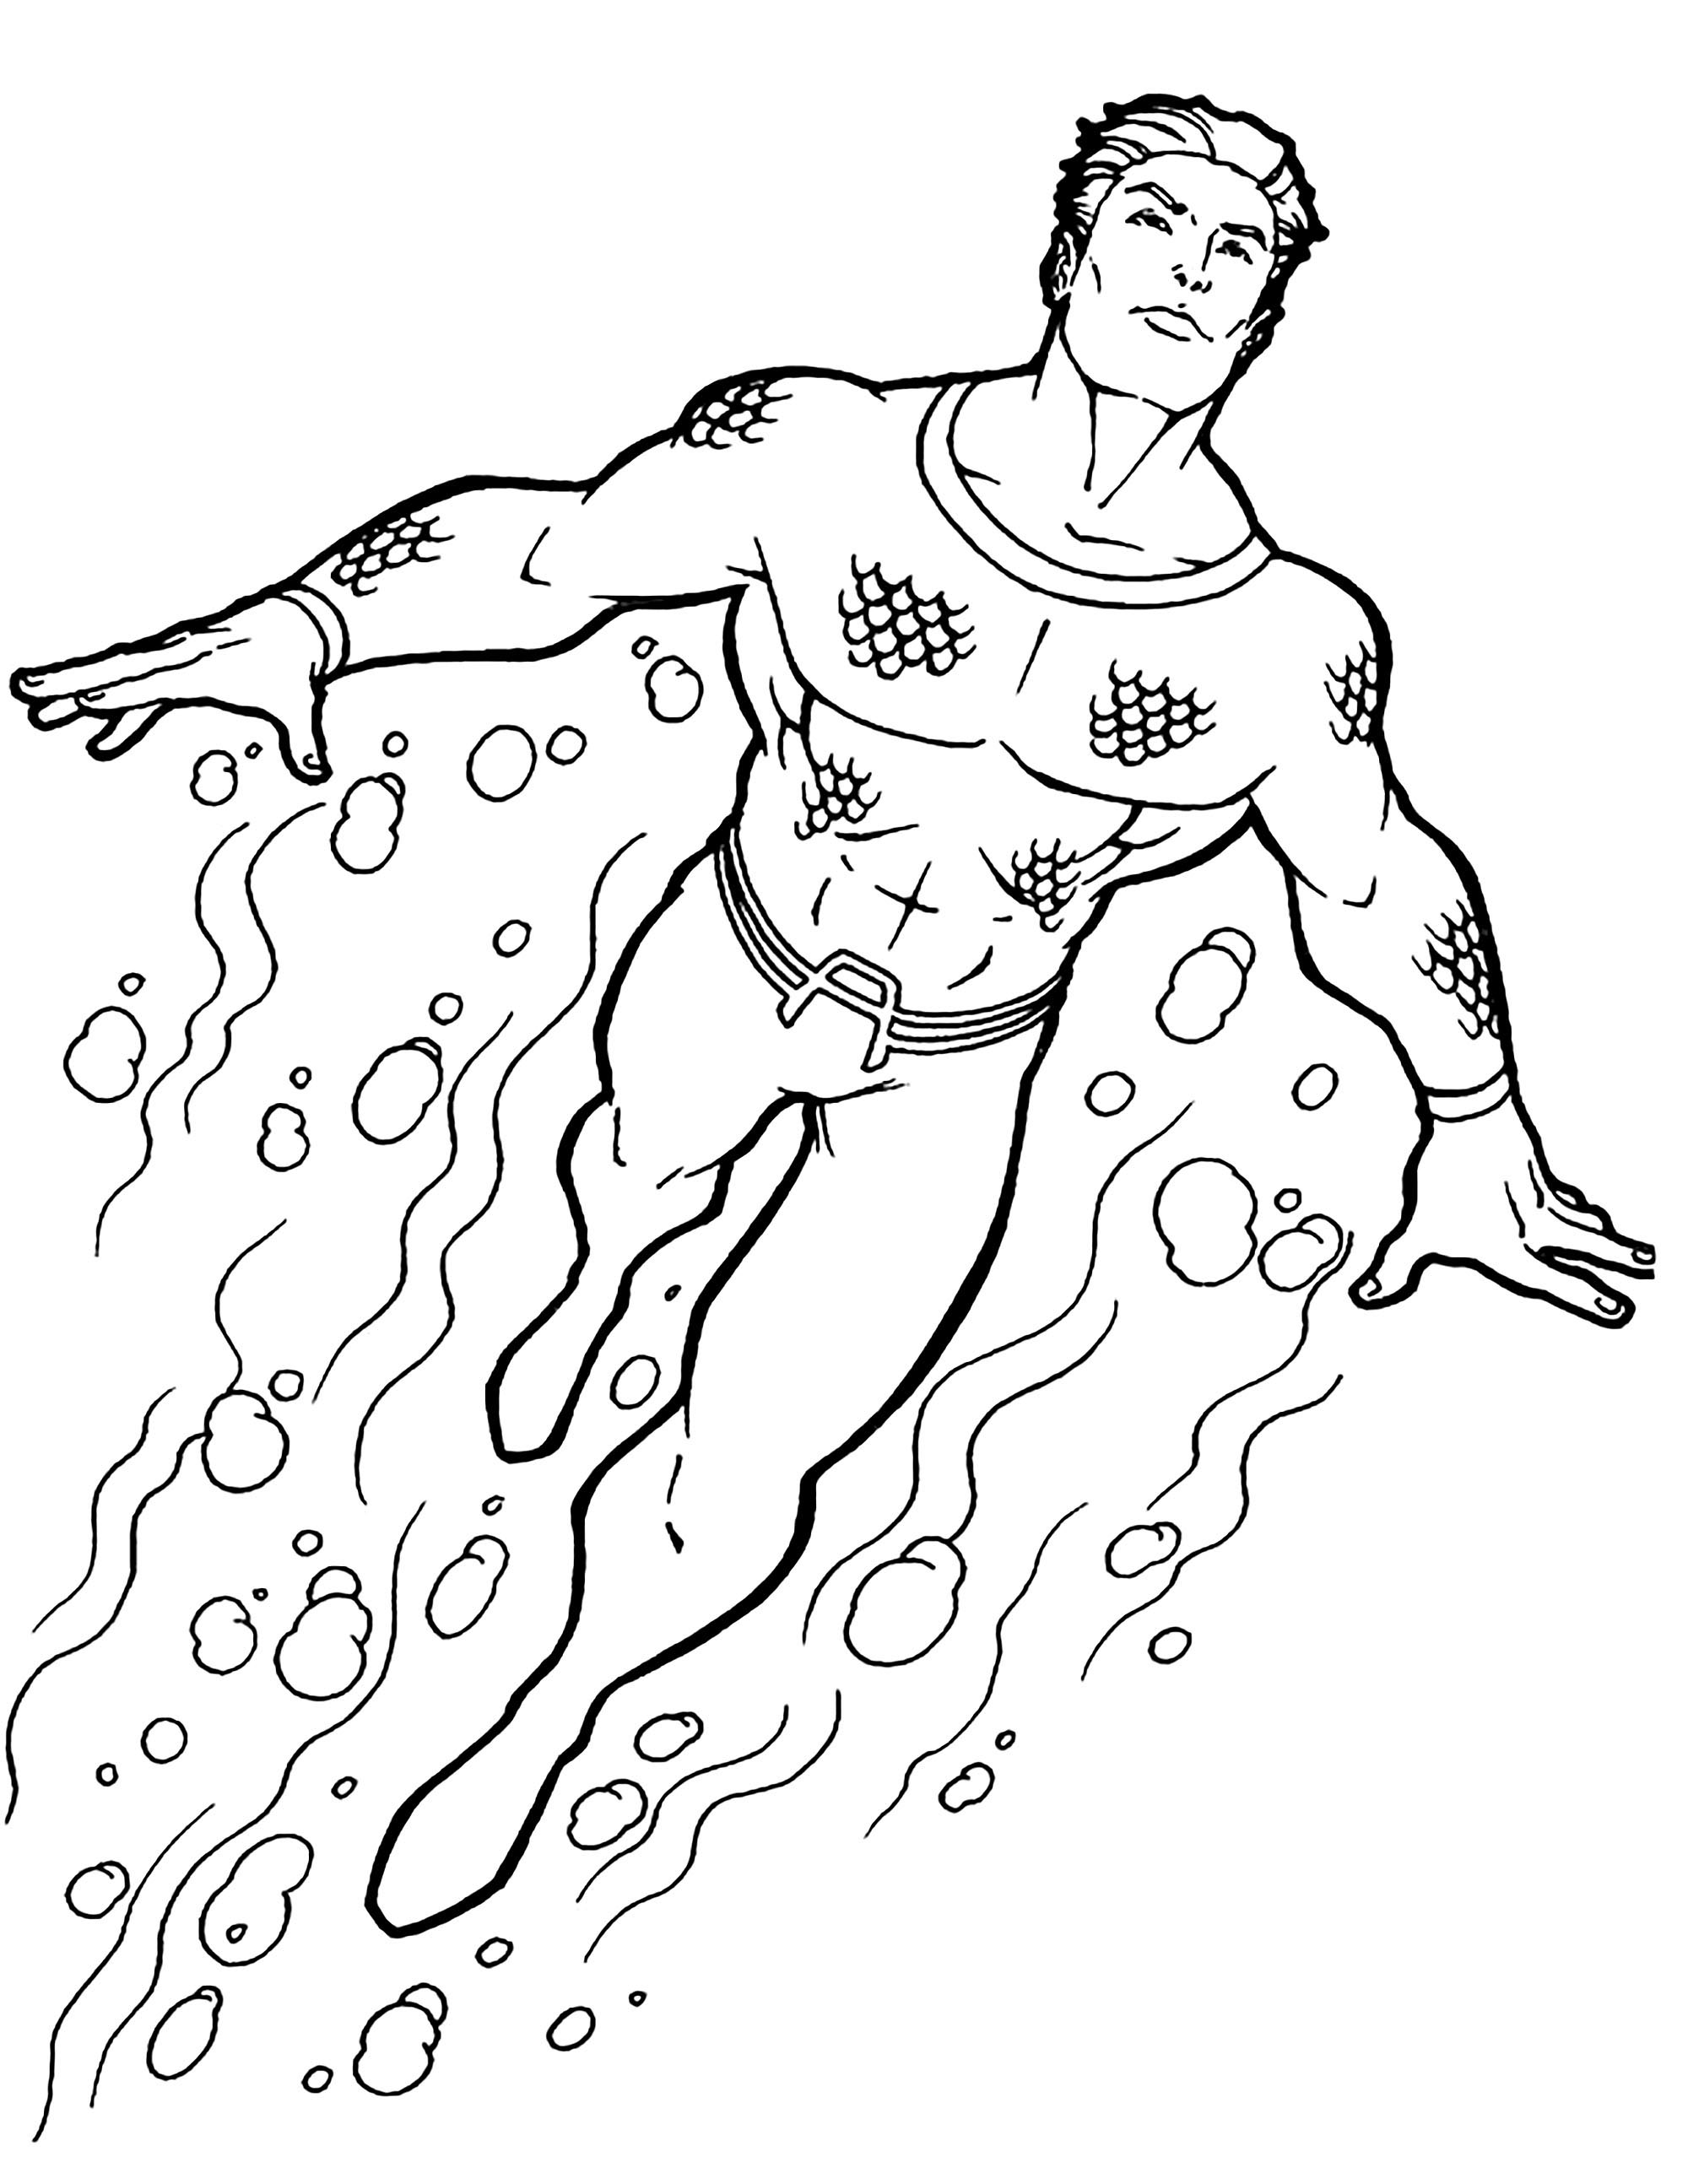 Simple Aquaman coloring page